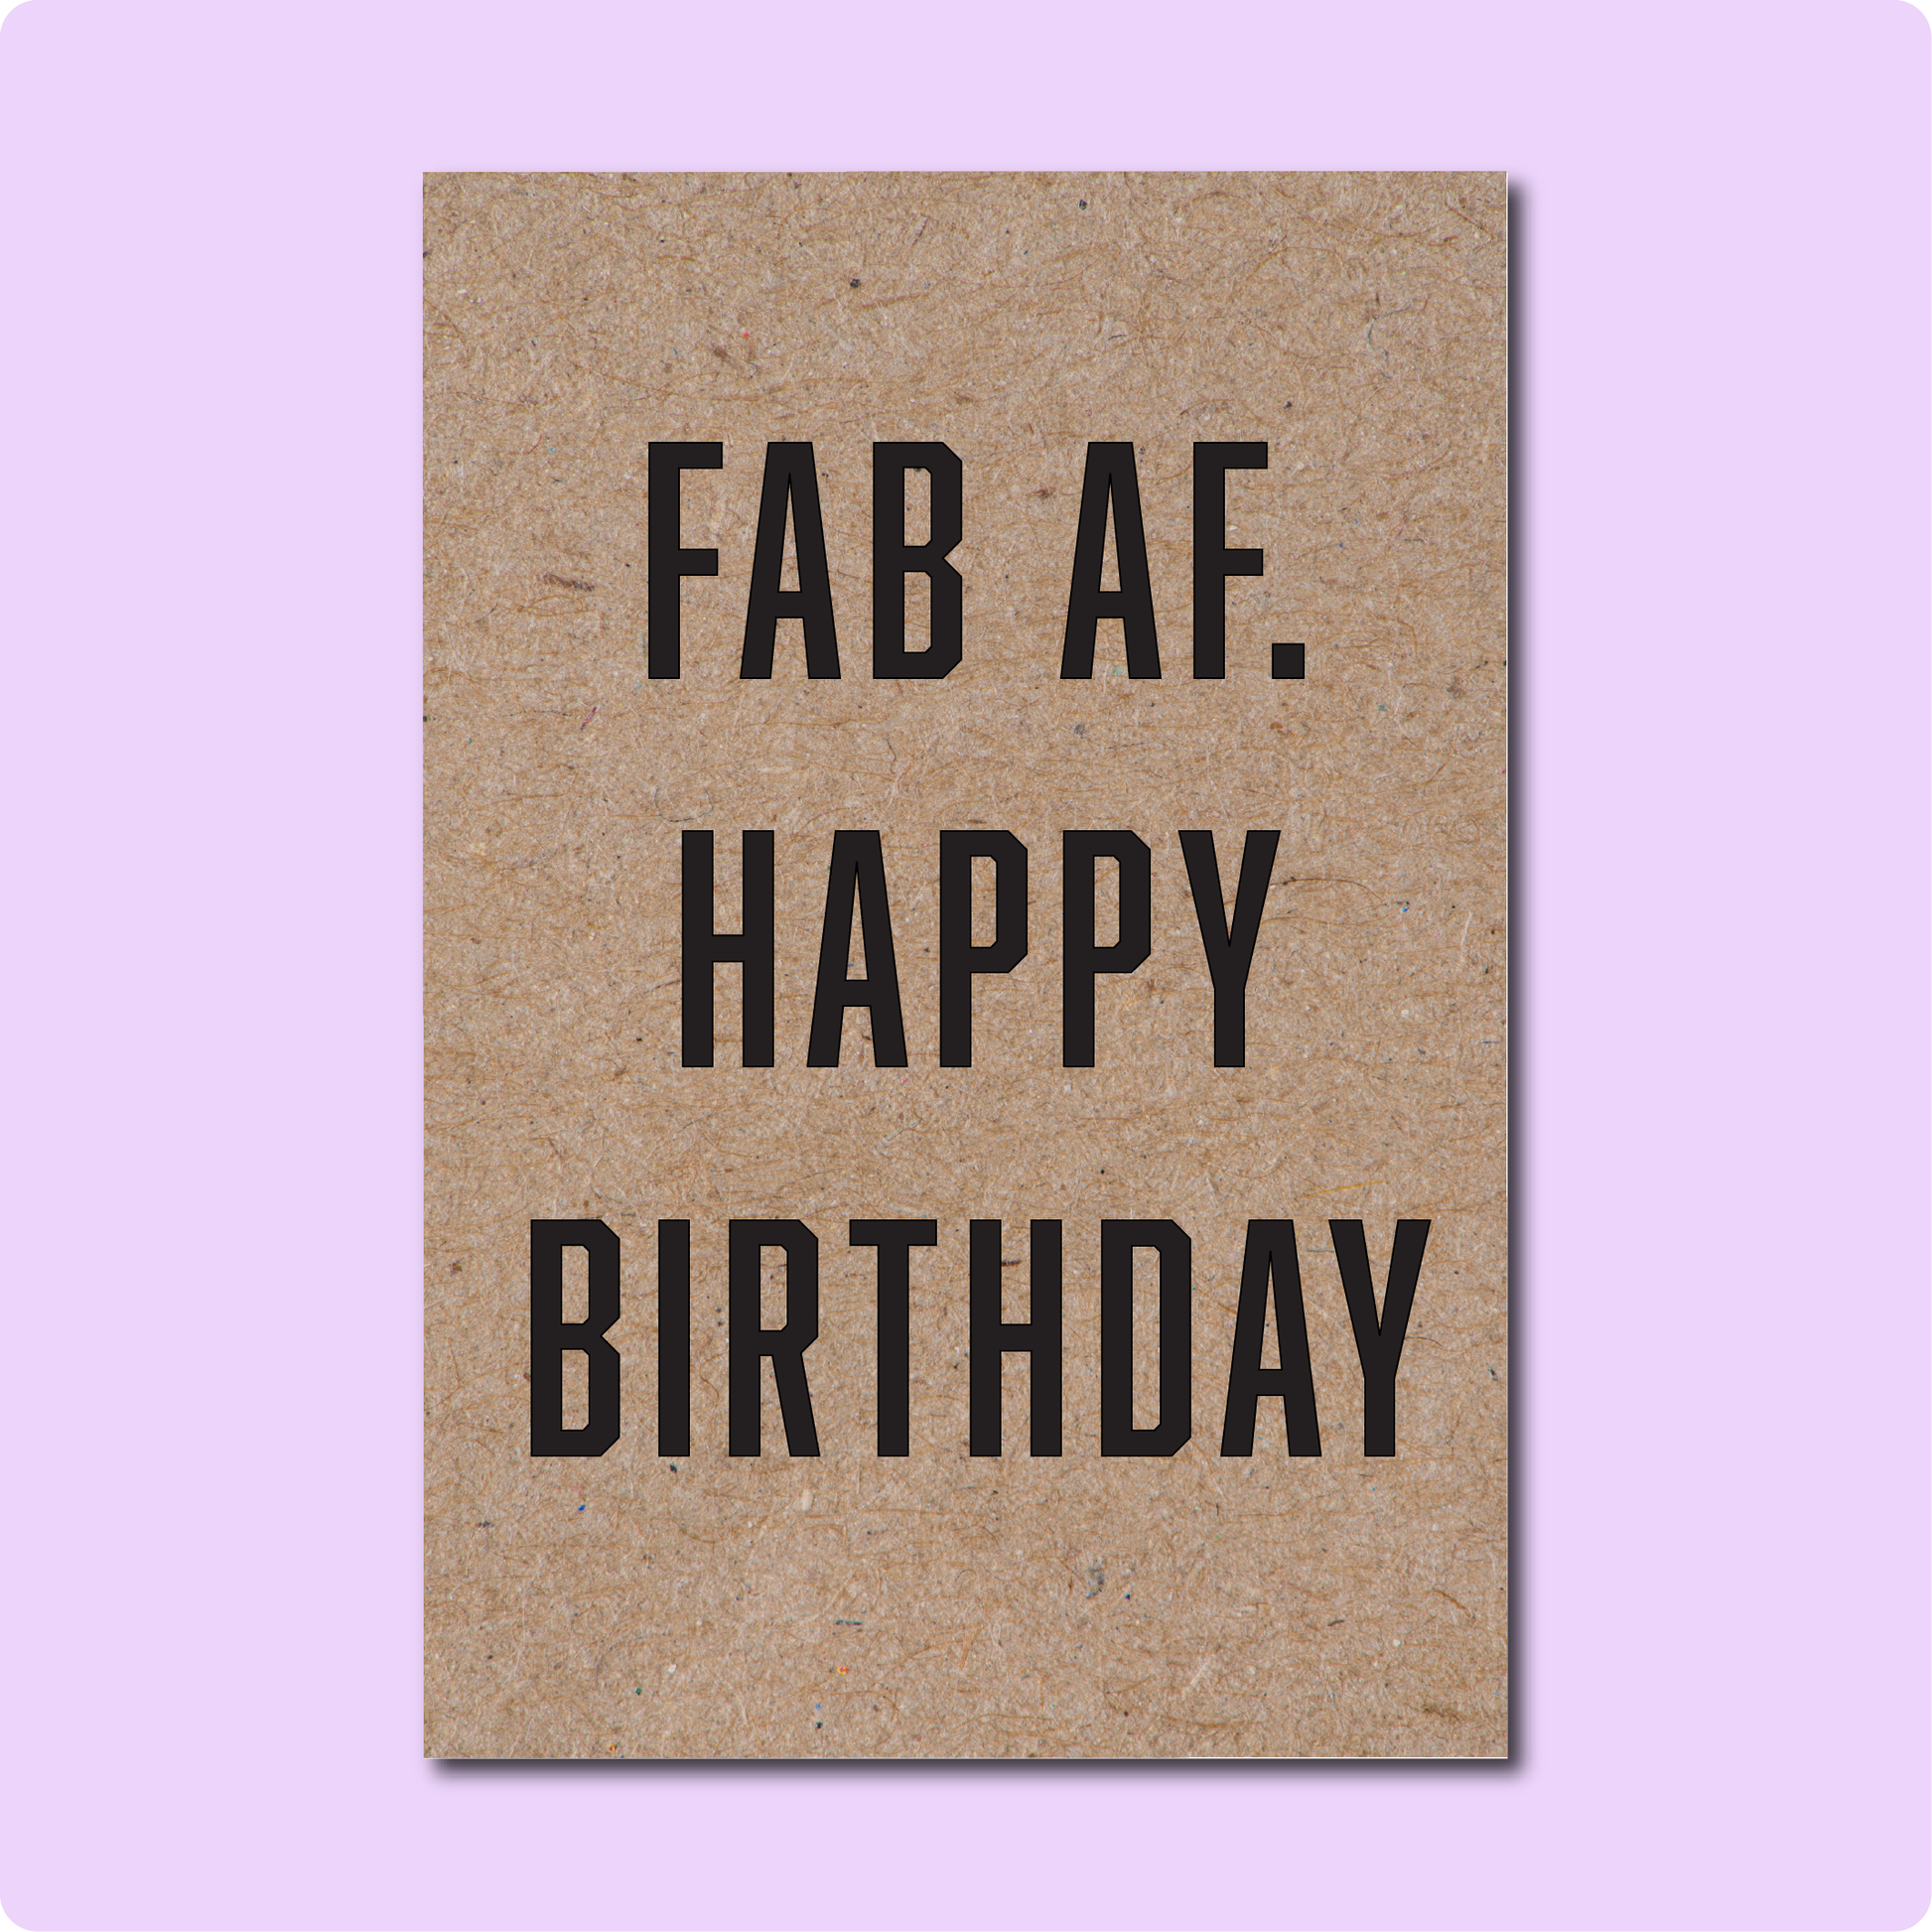 Fab AF. Happy Birthday Greeting Card. Made in Brisbane Australia on recycled Australian paper. A6 size.